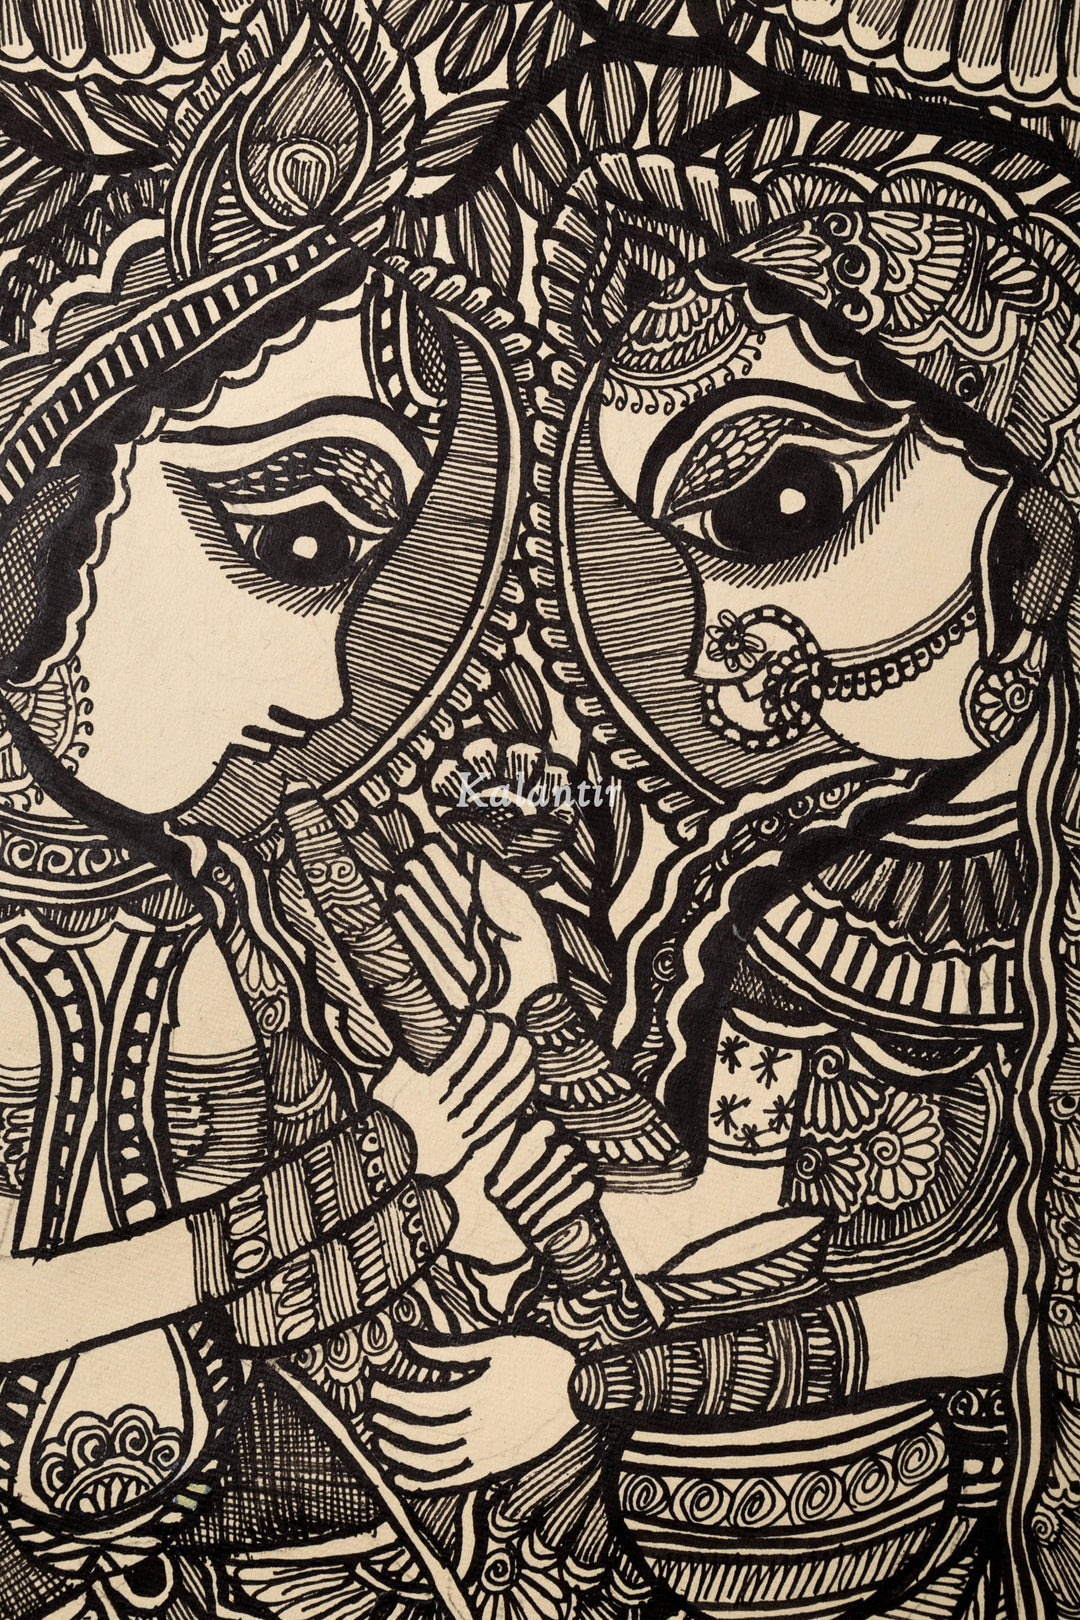 Focussed view of top half of this black and white Madhubani painting showing faces of Radha and Krishna with flute and matki in hands respectively.